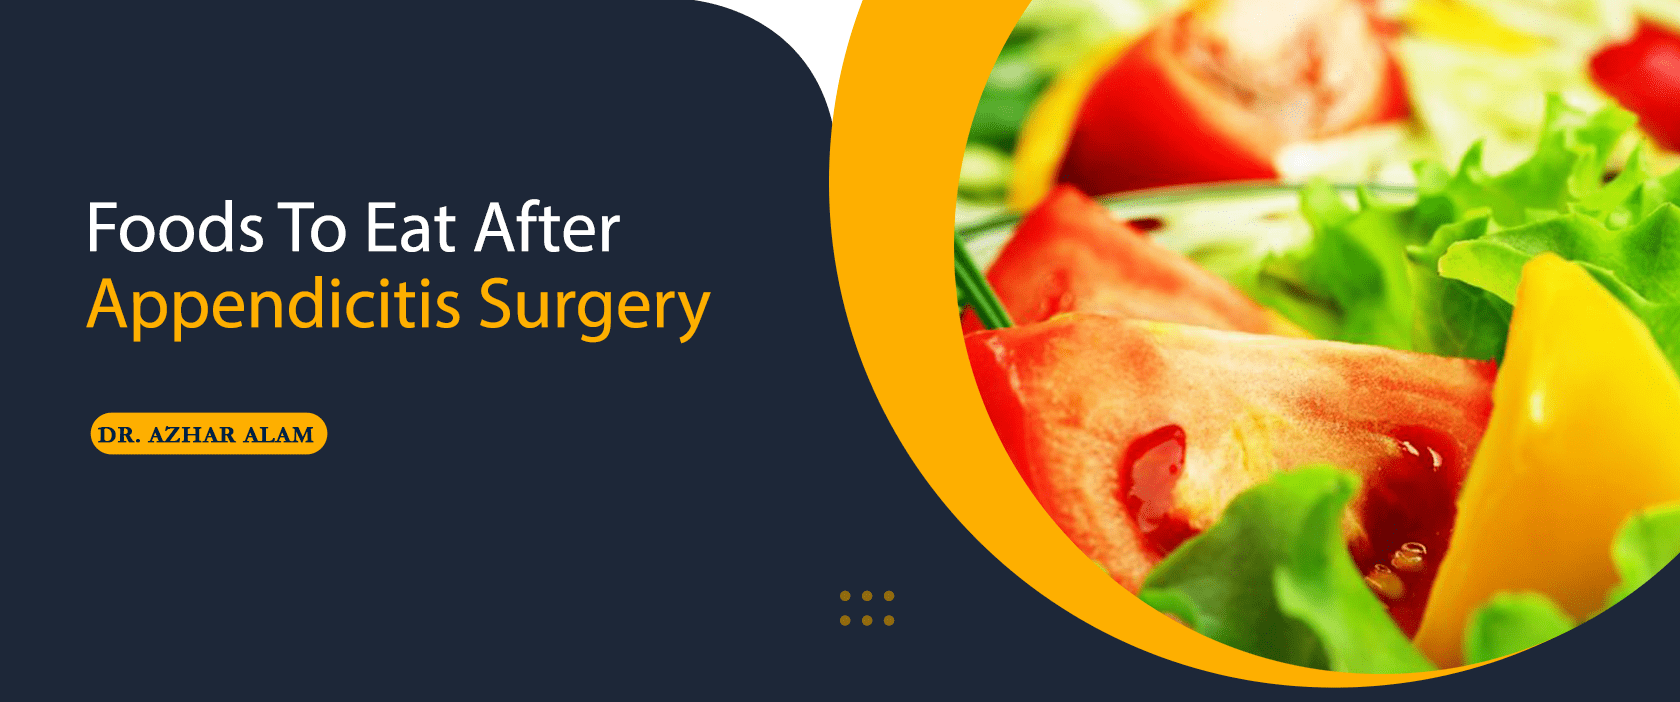 Foods to eat after appendicitis surgery